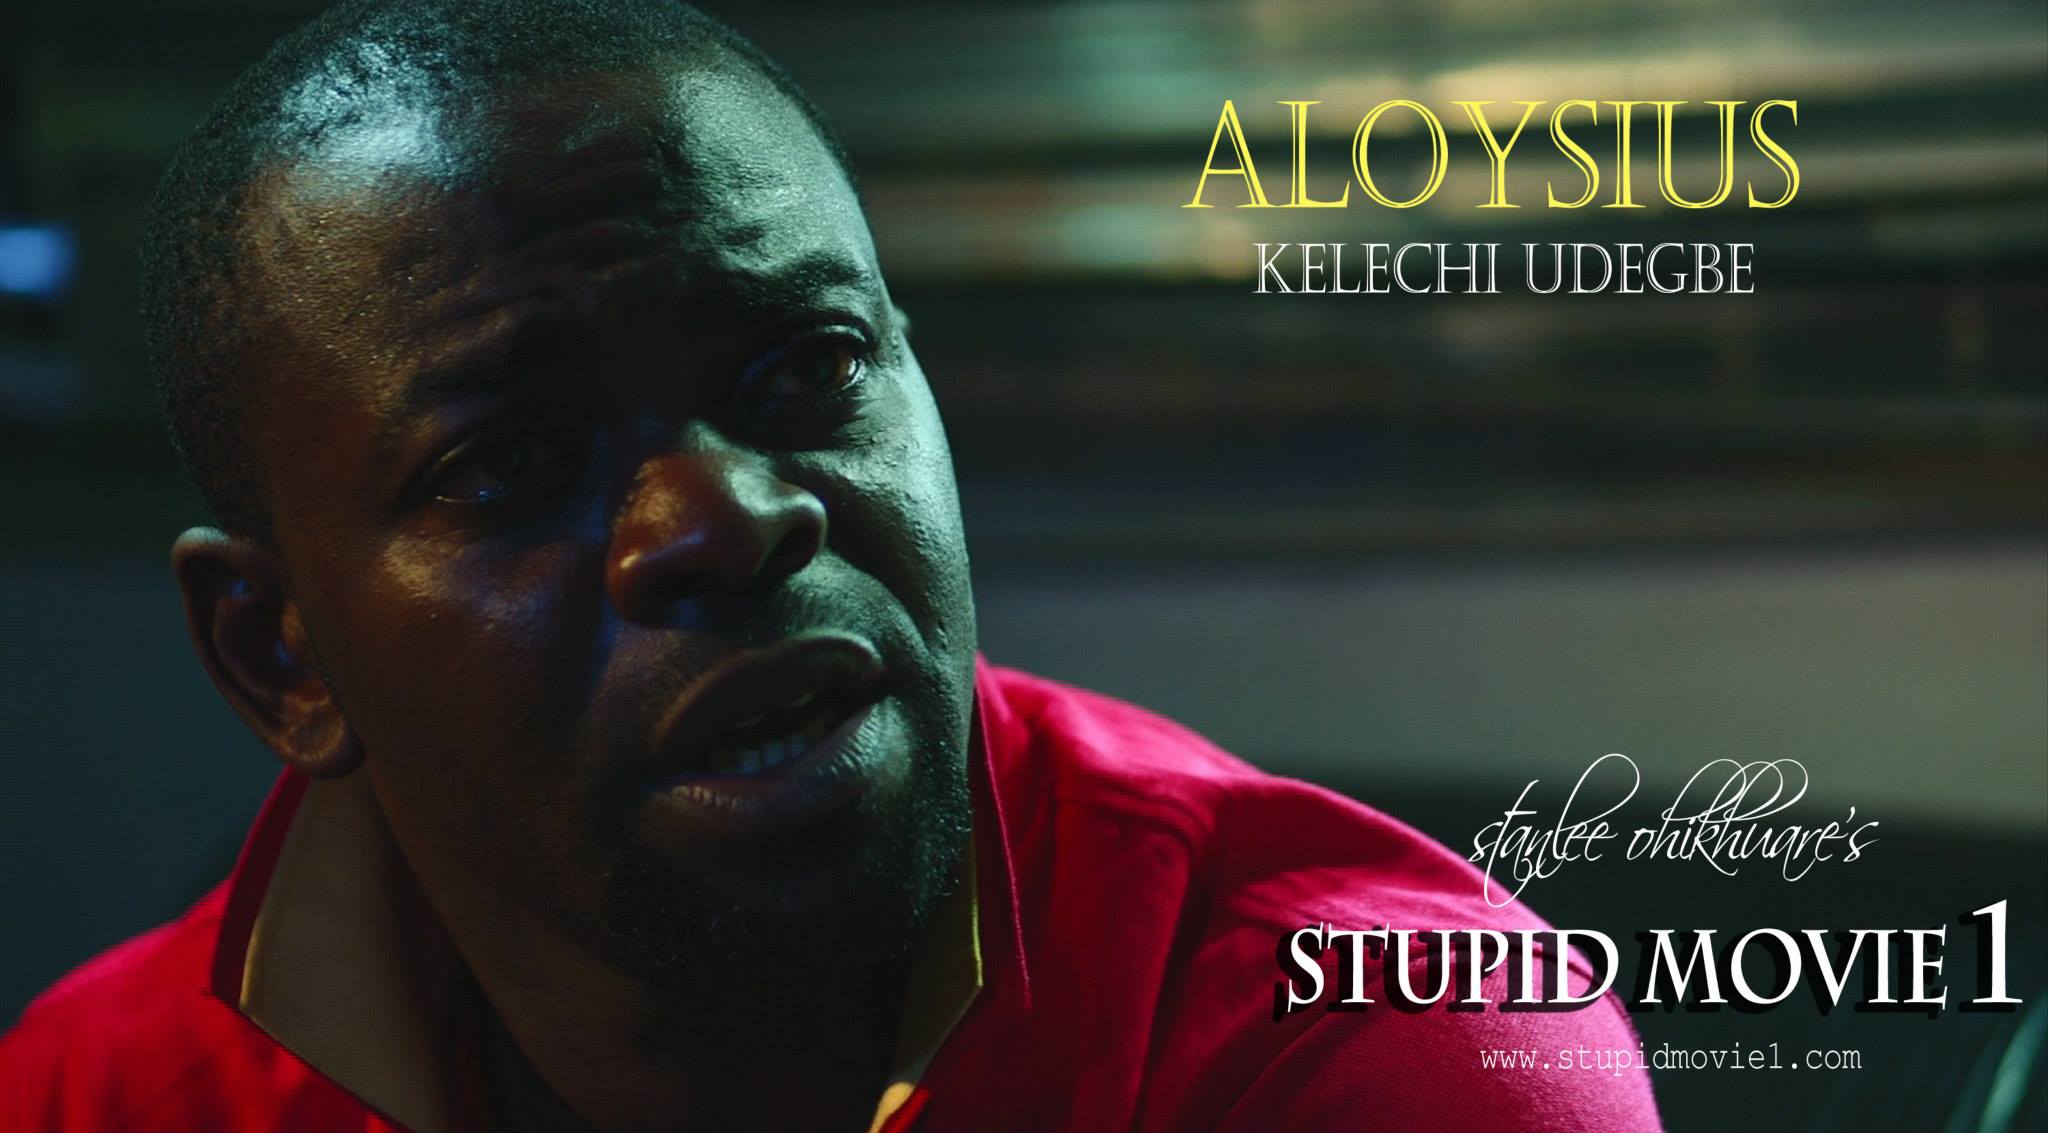 CHARACTER POSTER (ALOYSIUS - Kelechi Udegbe) for Stanlee Ohikhuare's STUPID MOVIE 1